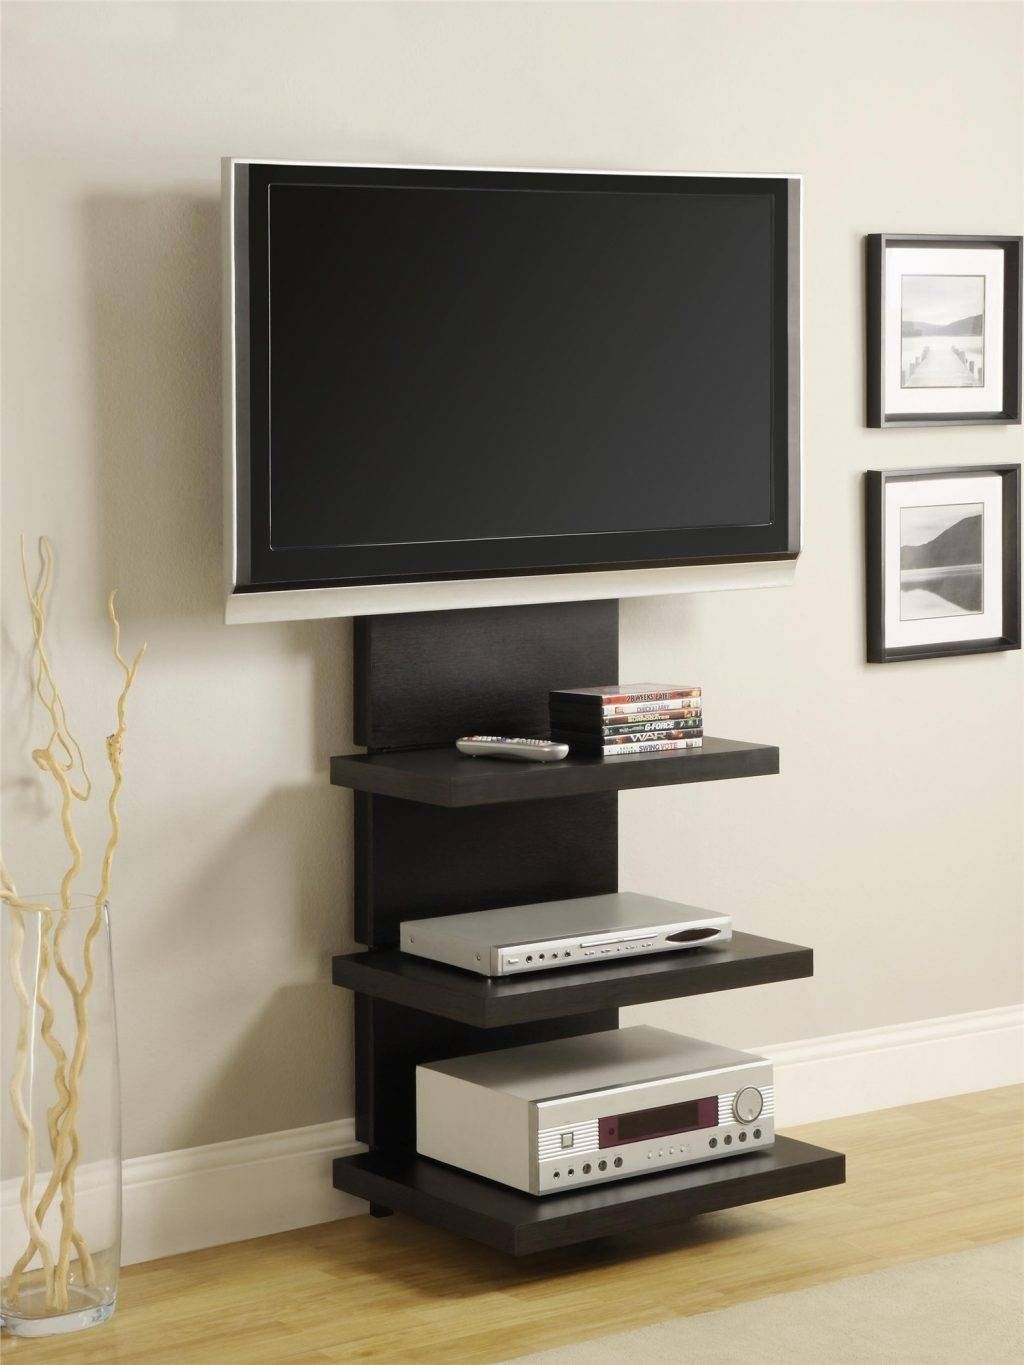 15 Best Tv Stands for Small Rooms